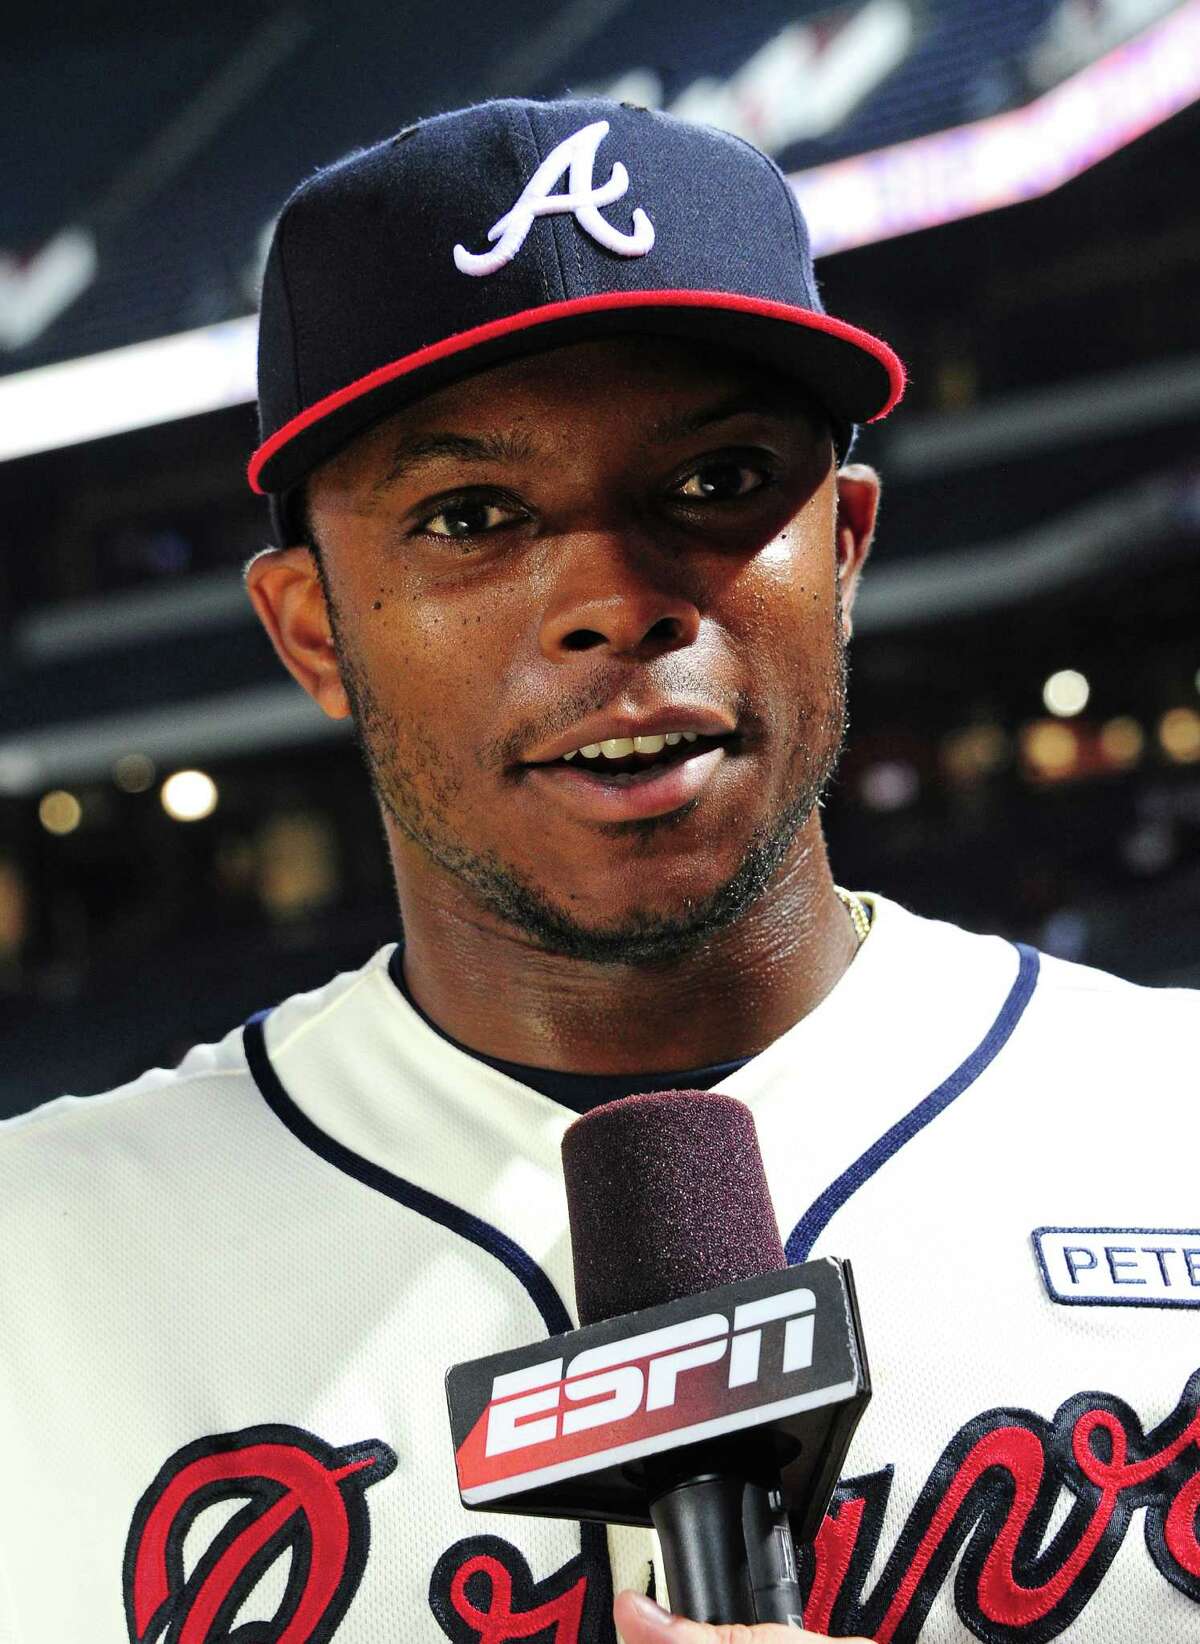 ATLANTA, GA - AUGUST 10: Justin Upton #8 of the Atlanta Braves is interviewed after the game against the Washington Nationals at Turner Field on August 10, 2014 in Atlanta, Georgia. (Photo by Scott Cunningham/Getty Images)